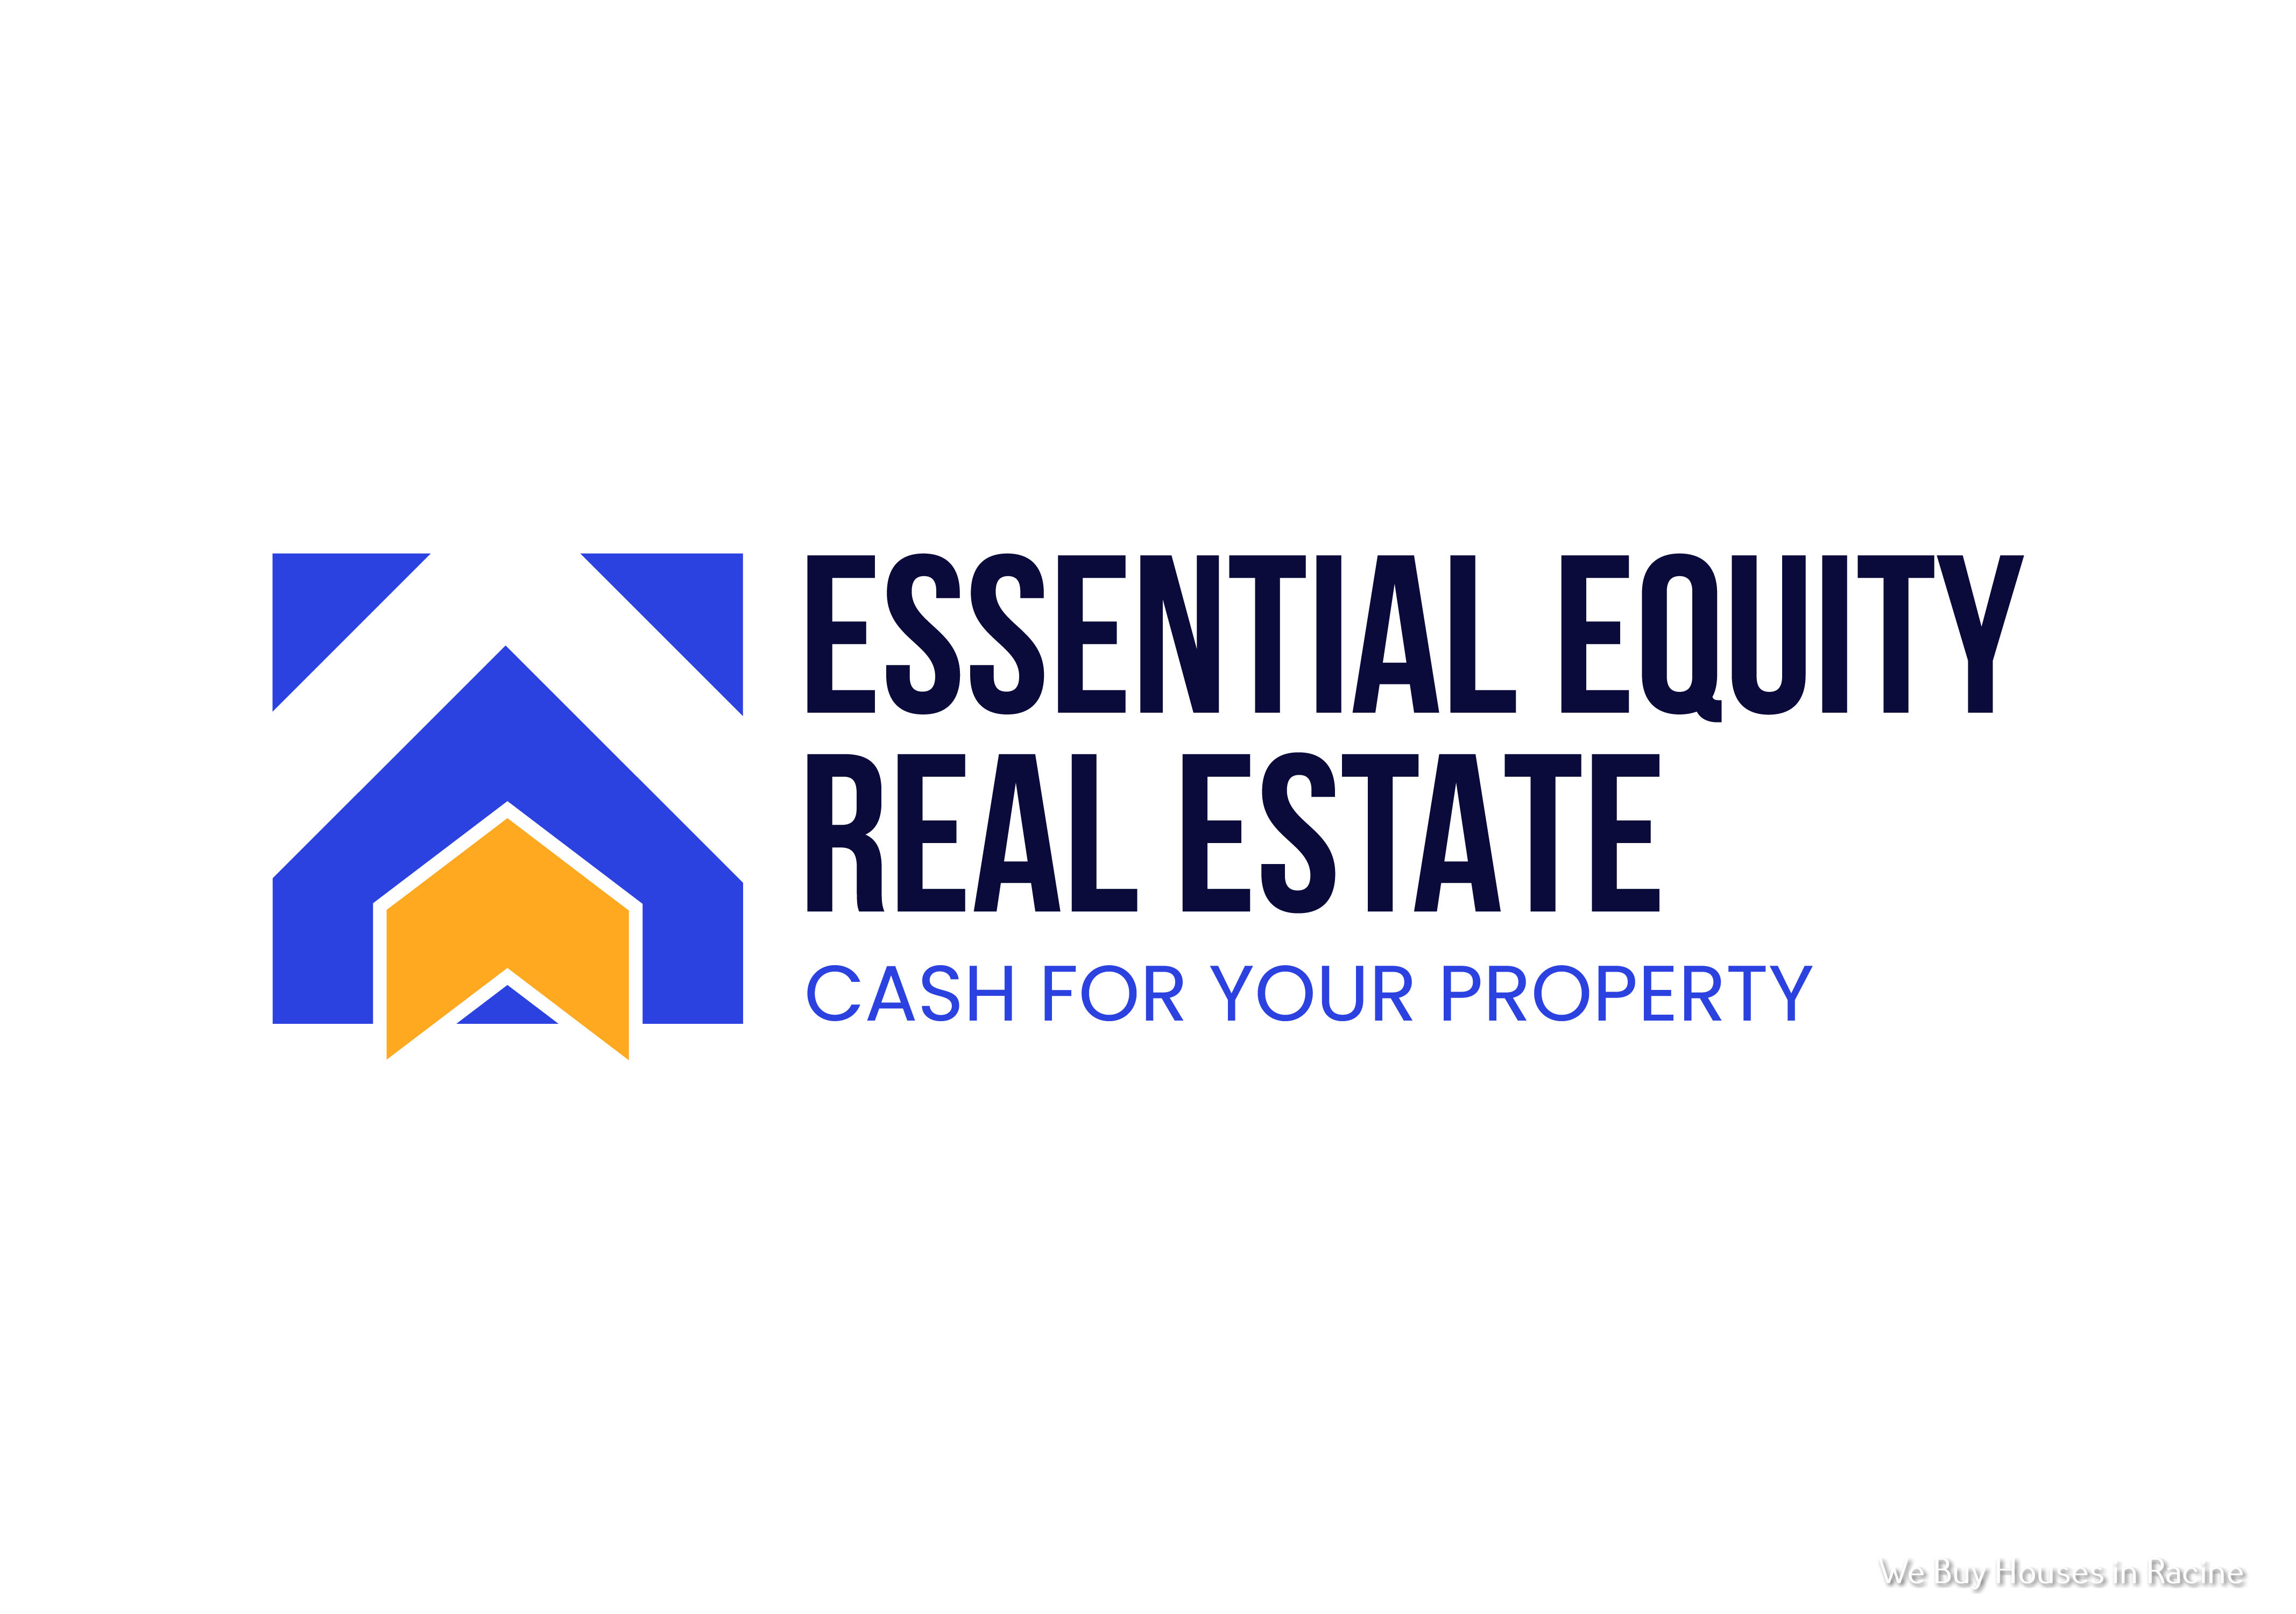 Racine Essential Equity Real Estate Outlines How to Pick the Best Cash Home Buyer